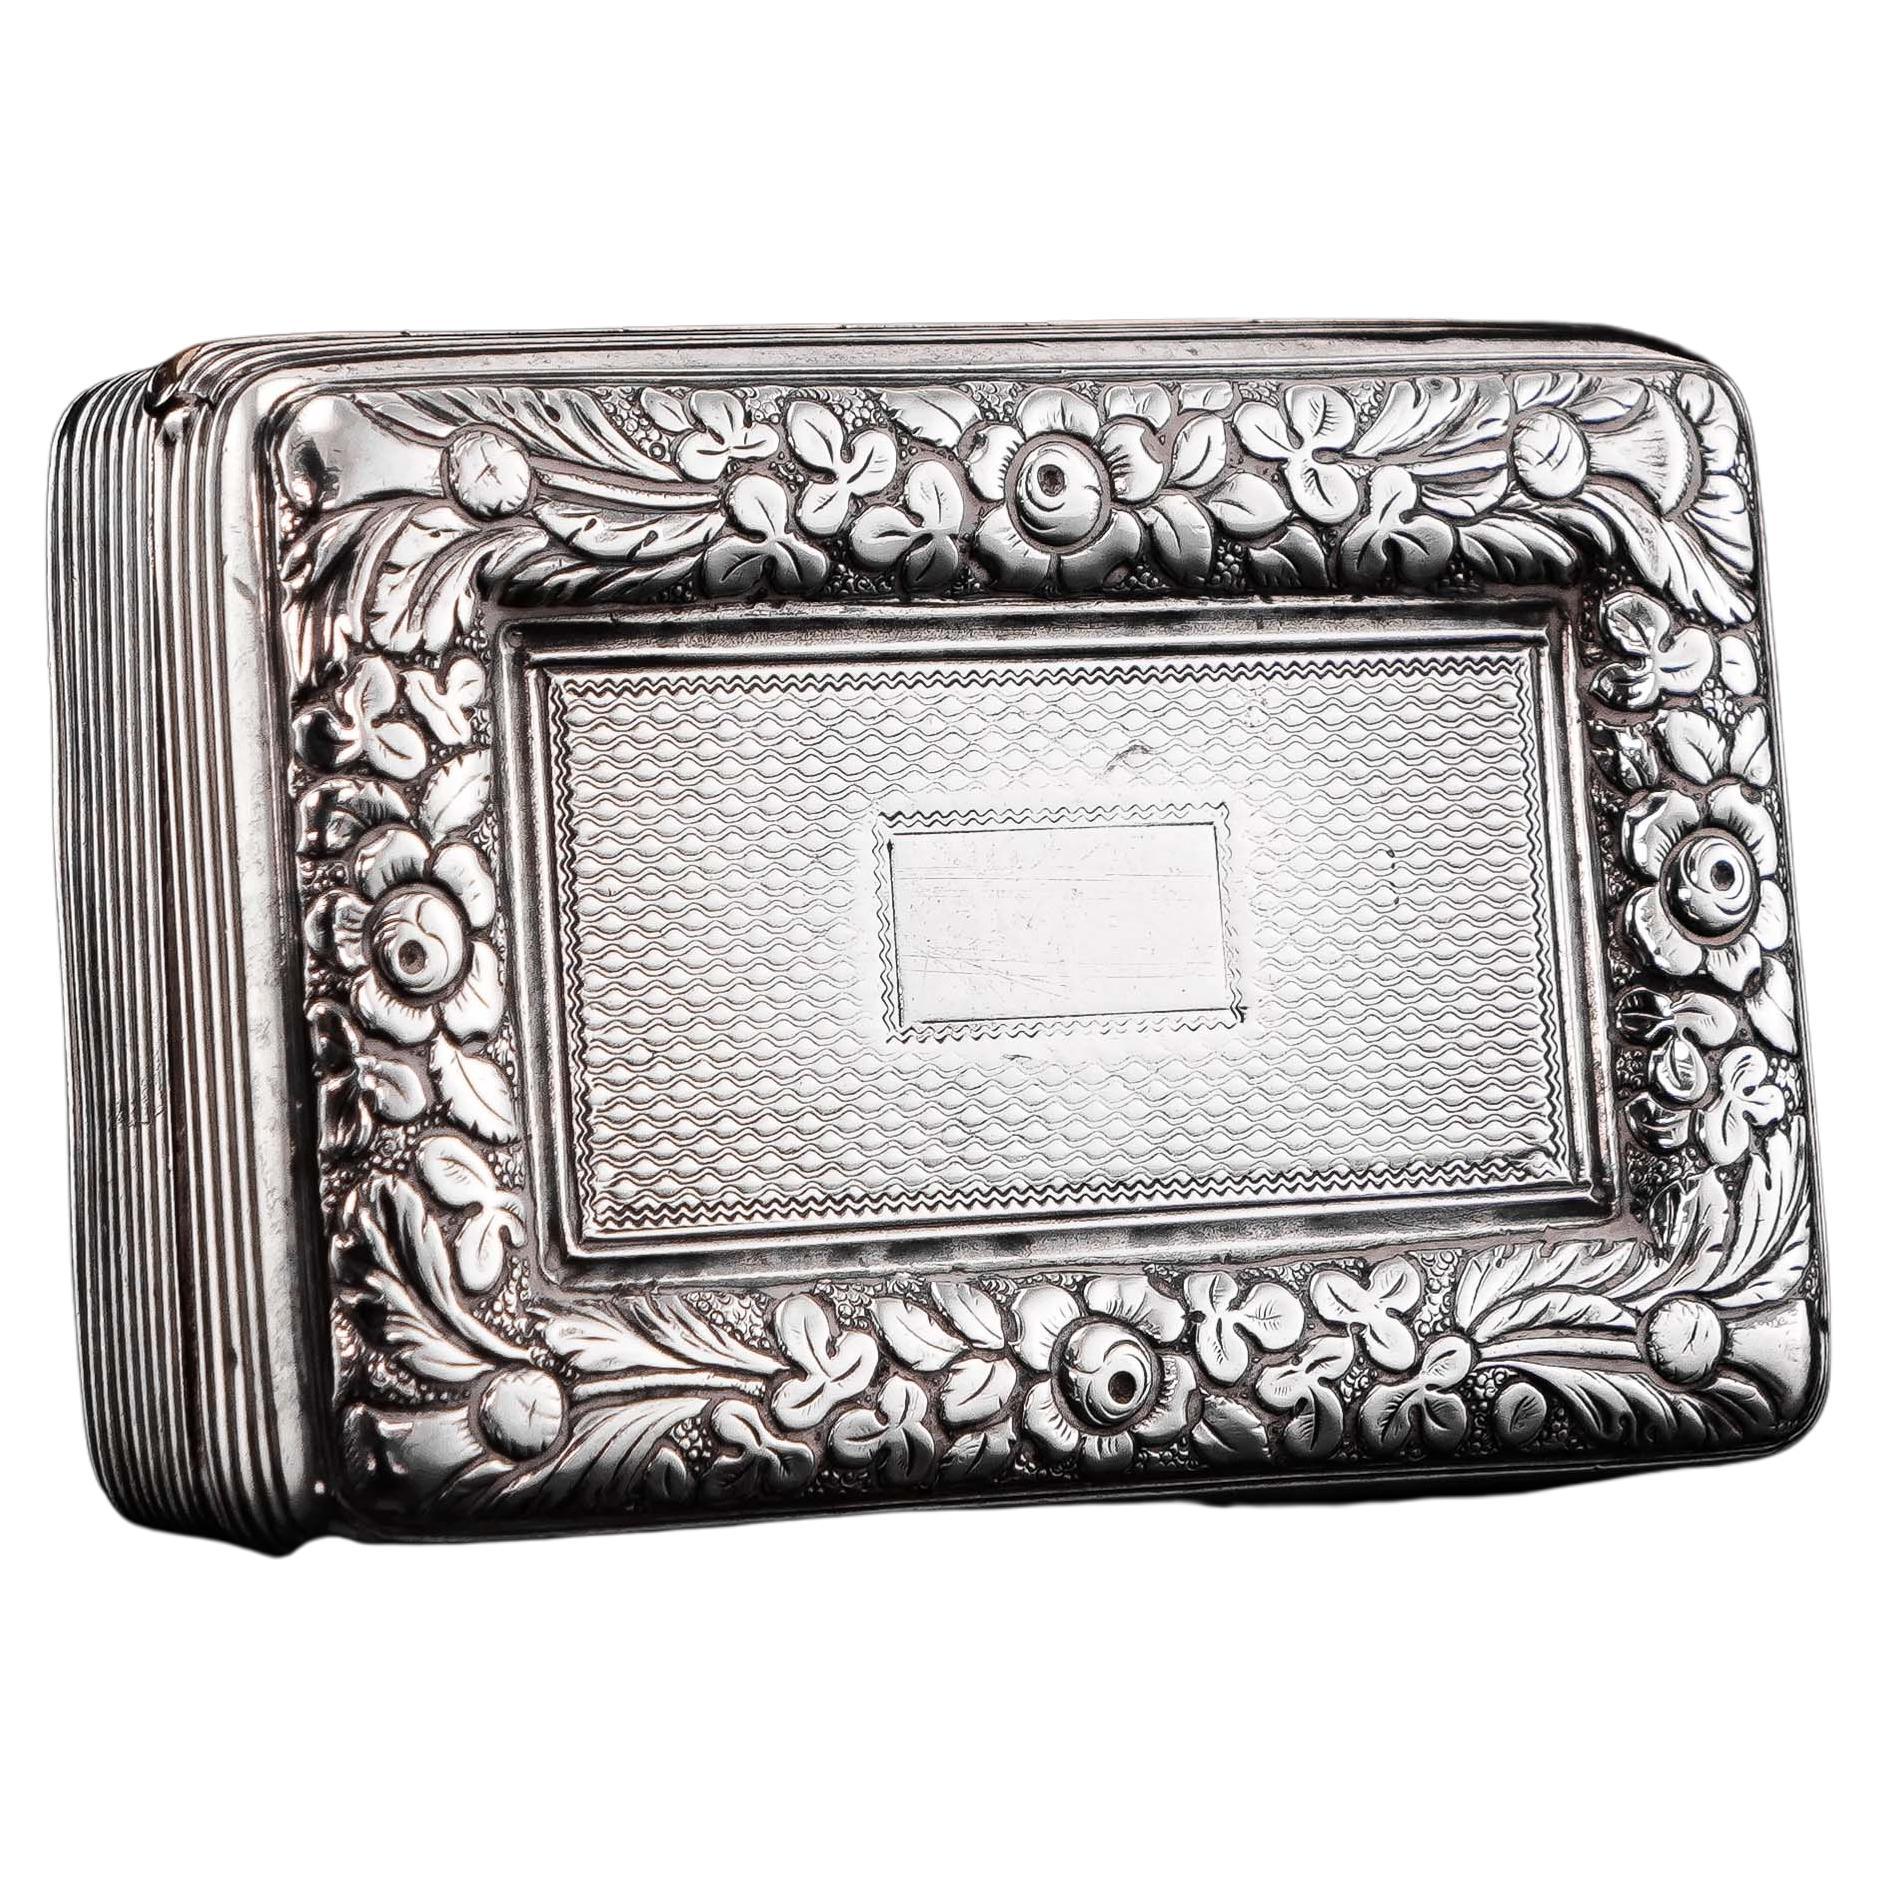 Antique Georgian Silver Snuff Box with Floral Border - Thomas Wilkes Barker 1824